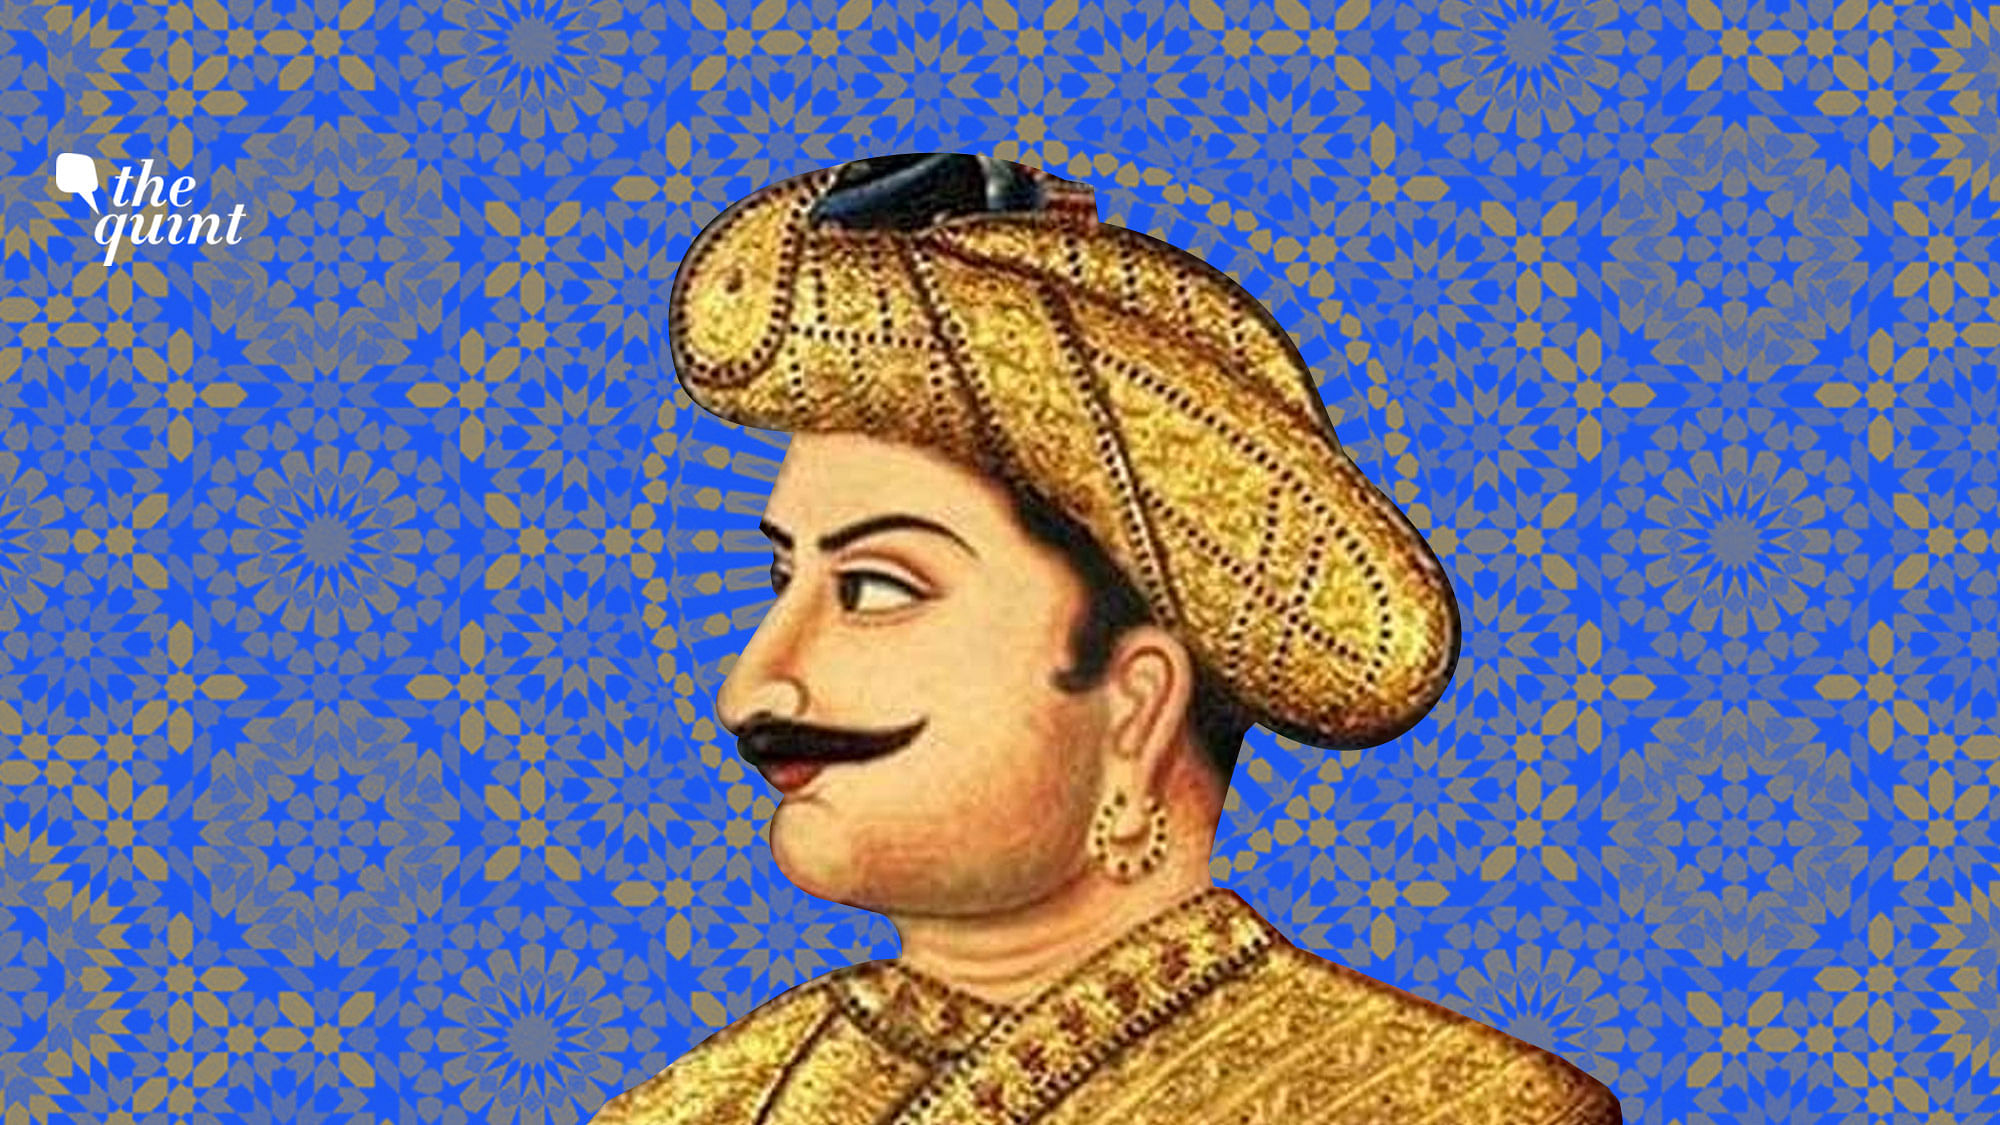 Is Tipu Sultan the ‘Tiger of Mysore’? Or Is he a tyrant? It all depends on who you’re asking.